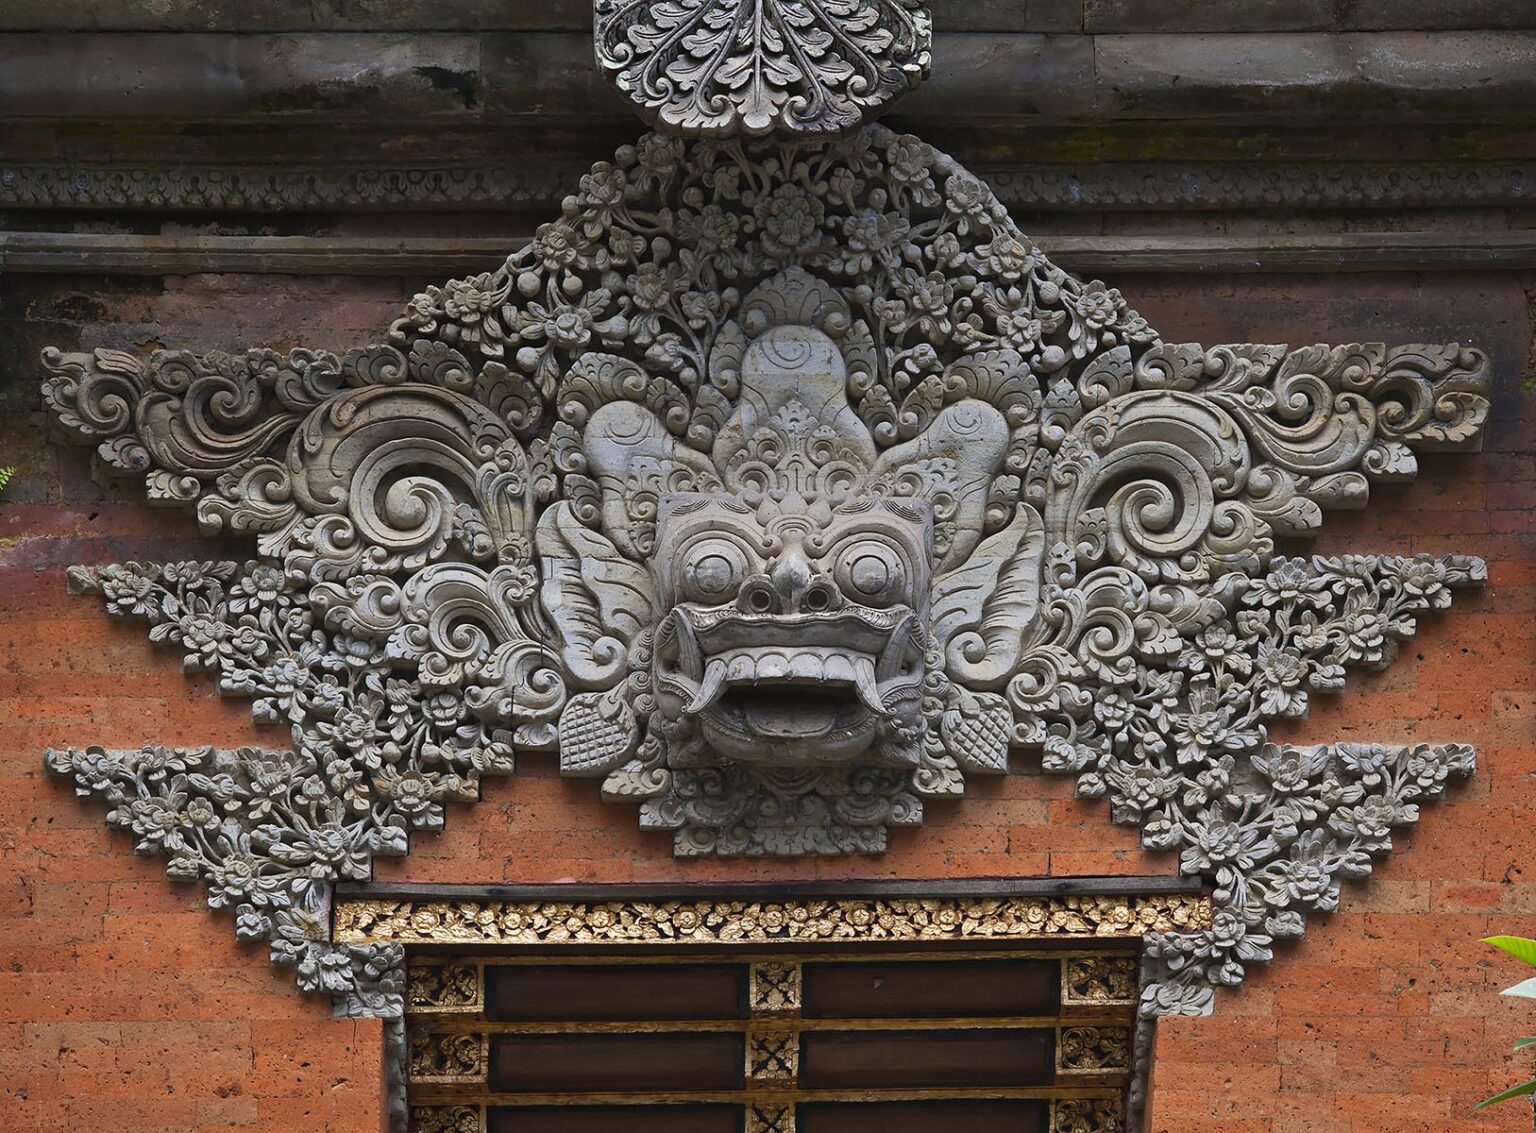 Ornate hand carved stone gate with Barong face of PURA DESA UBUD, the main Hindu temple of the town - UBUD, BALI